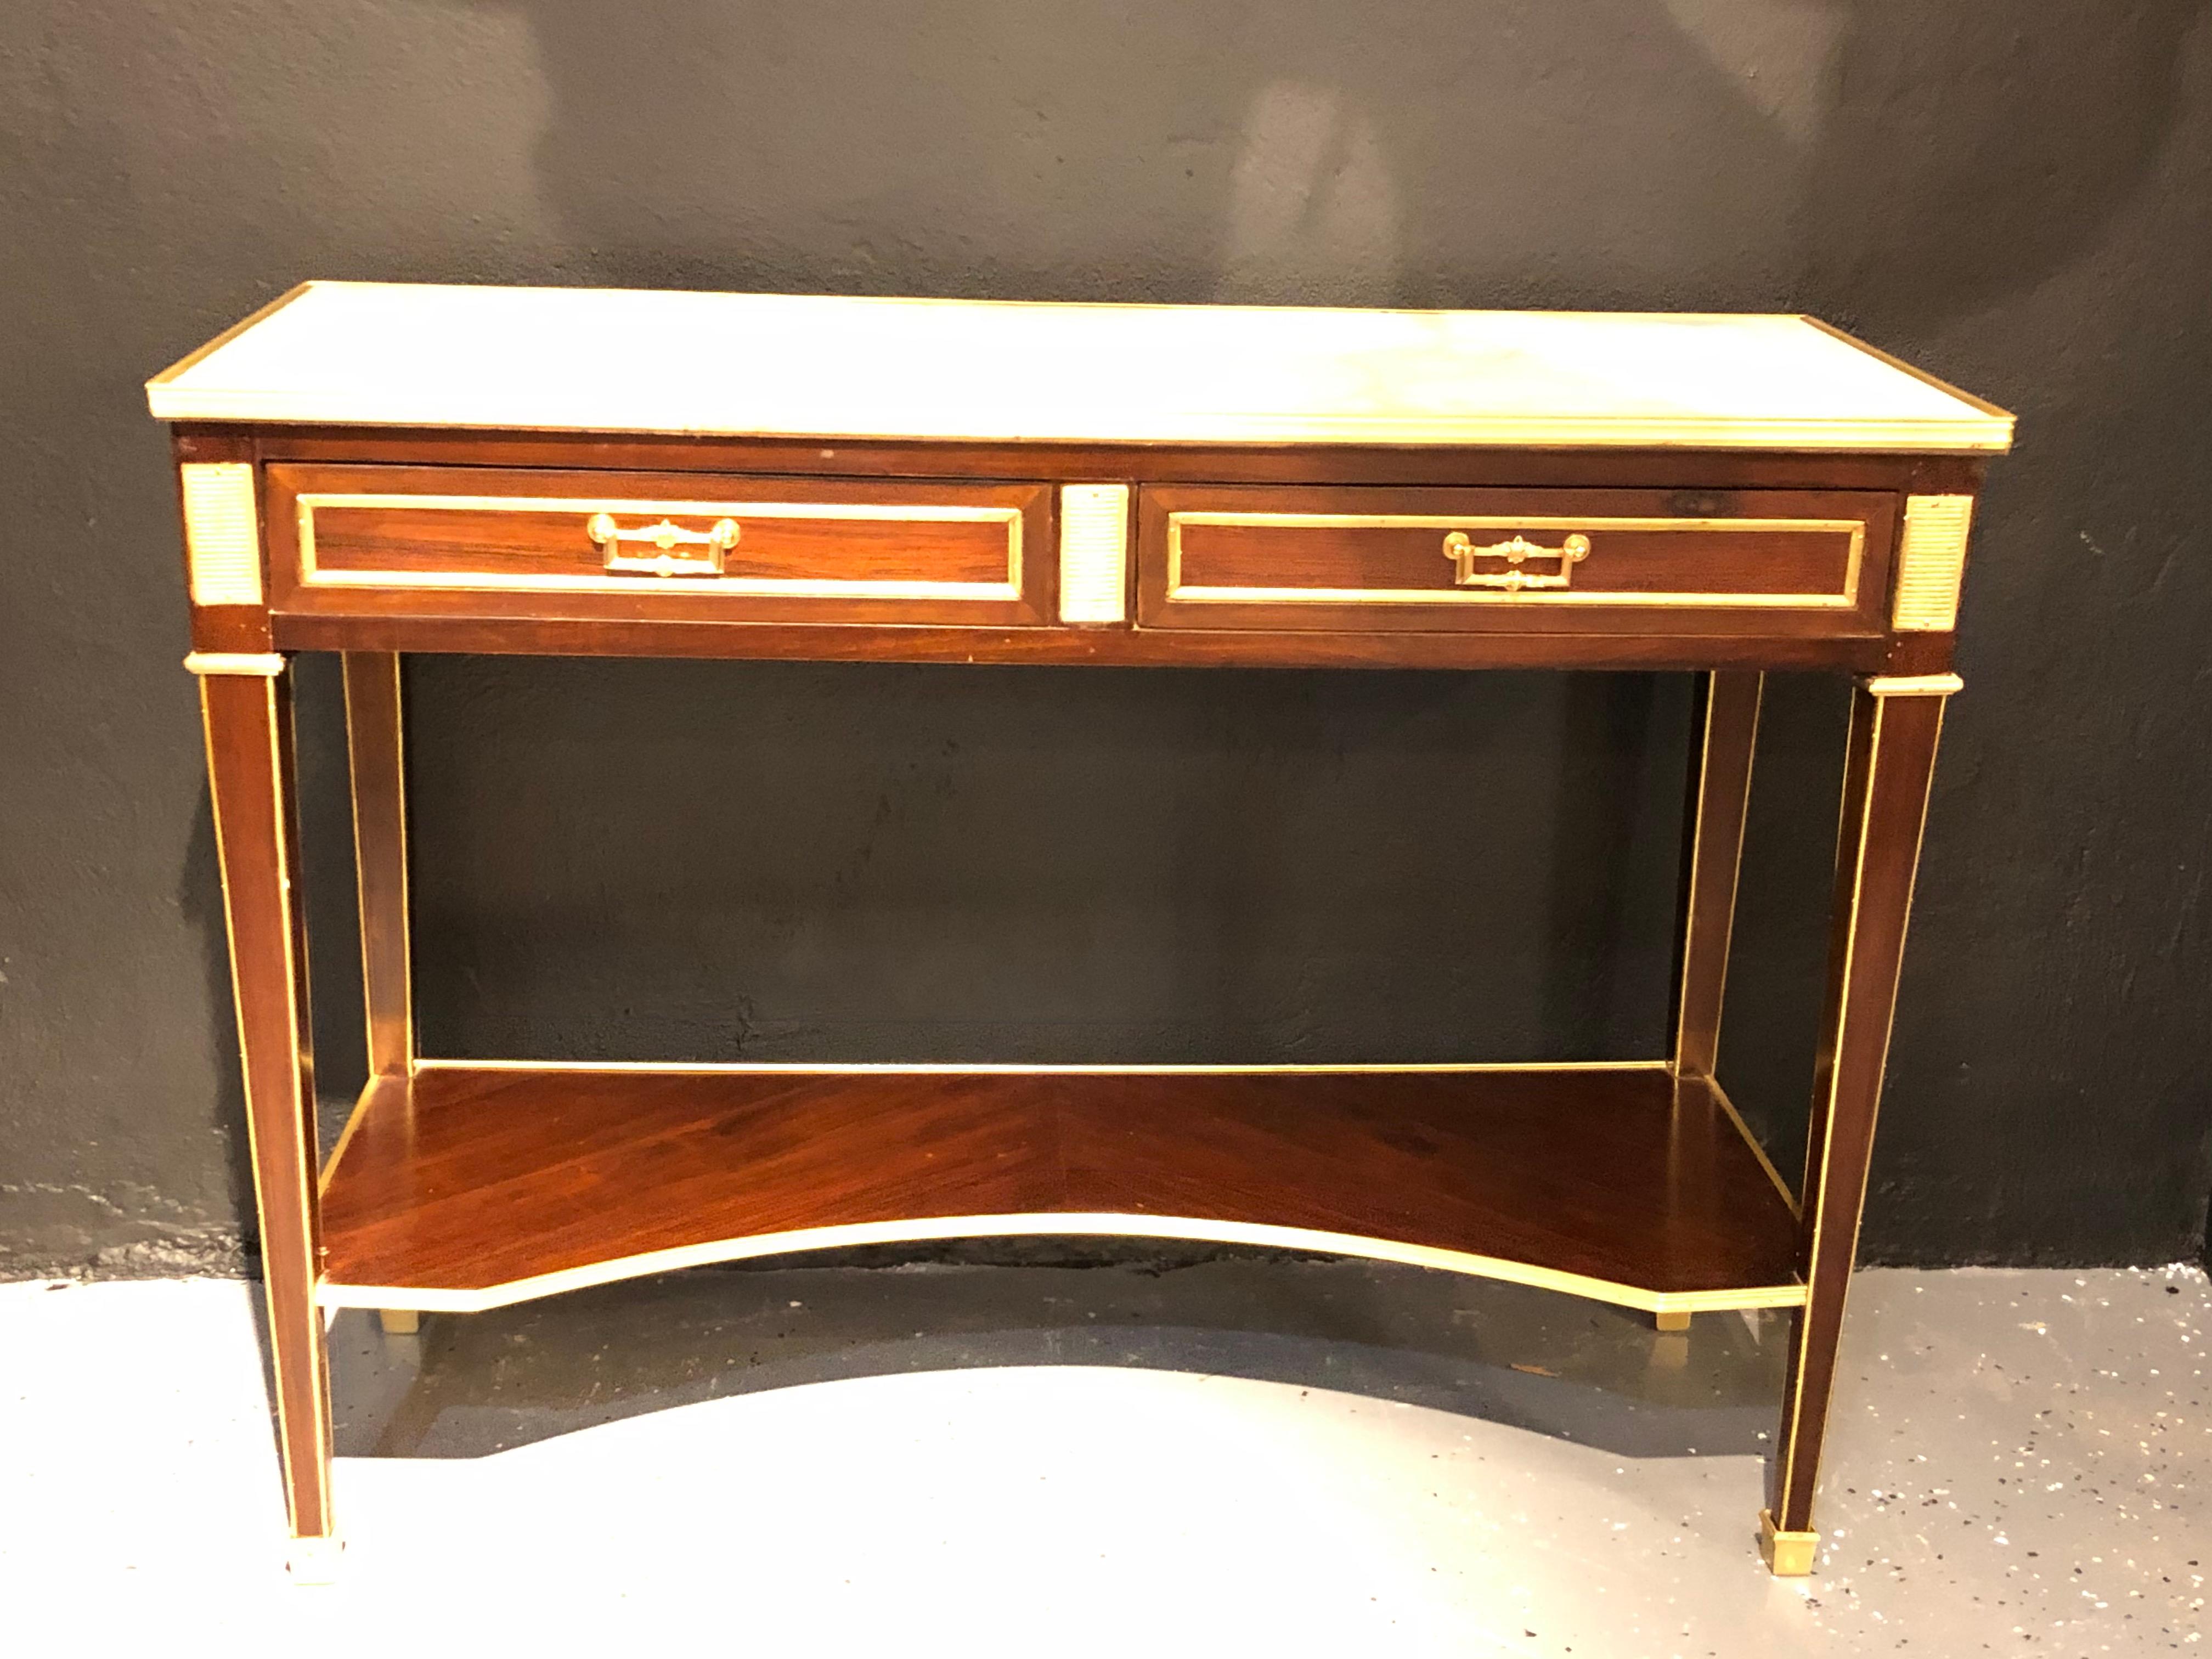 Jansen style two-drawer marble-top bronze console or serving table. Having a bronze framed white marble top supported by an oak secondary case of two drawers with bronze framing, flanked by bronze cookie cutter corners and center having an inverted